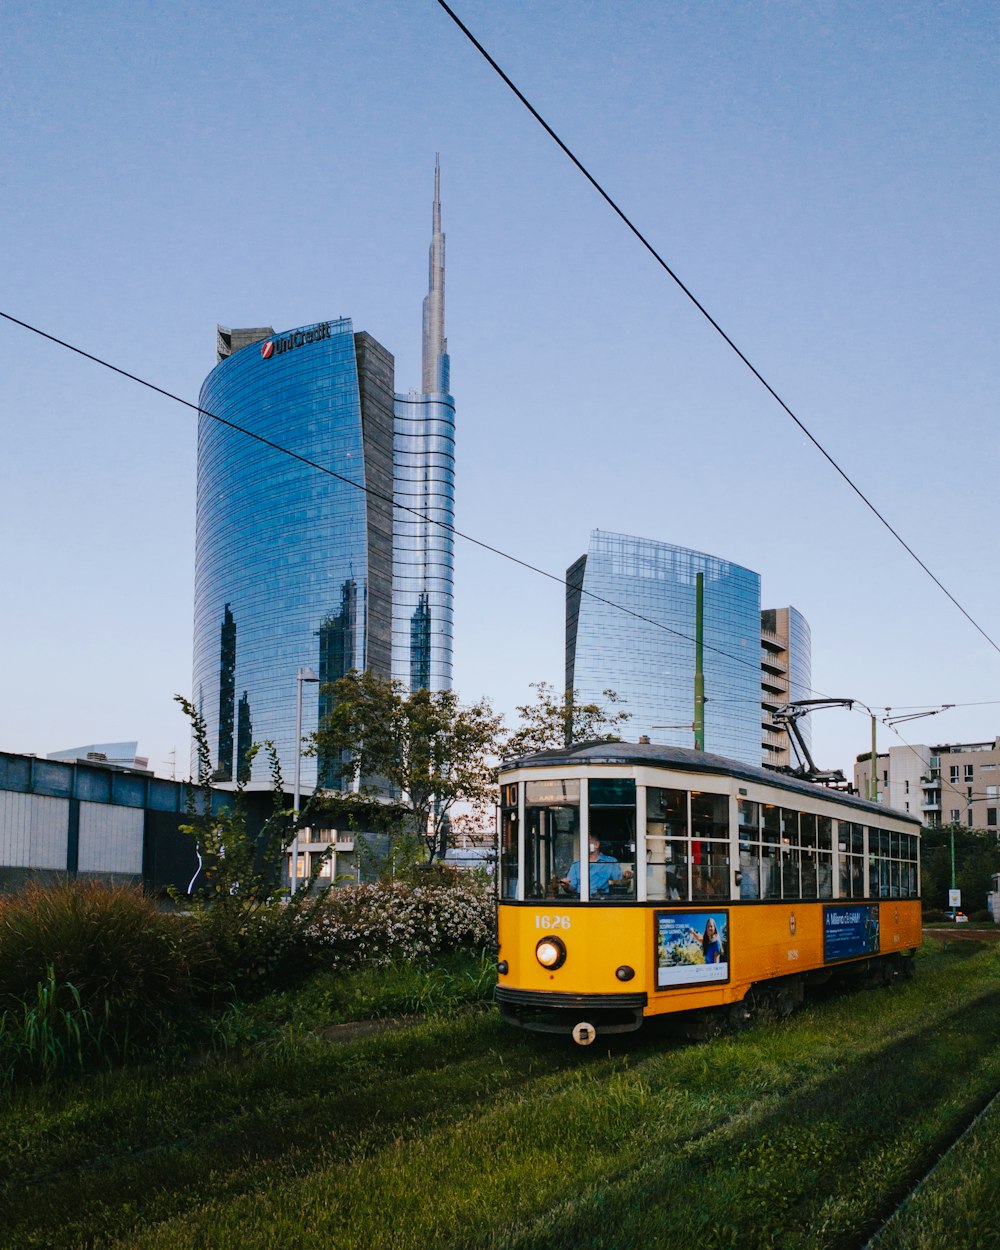 a trolley on a road with tall buildings in the background